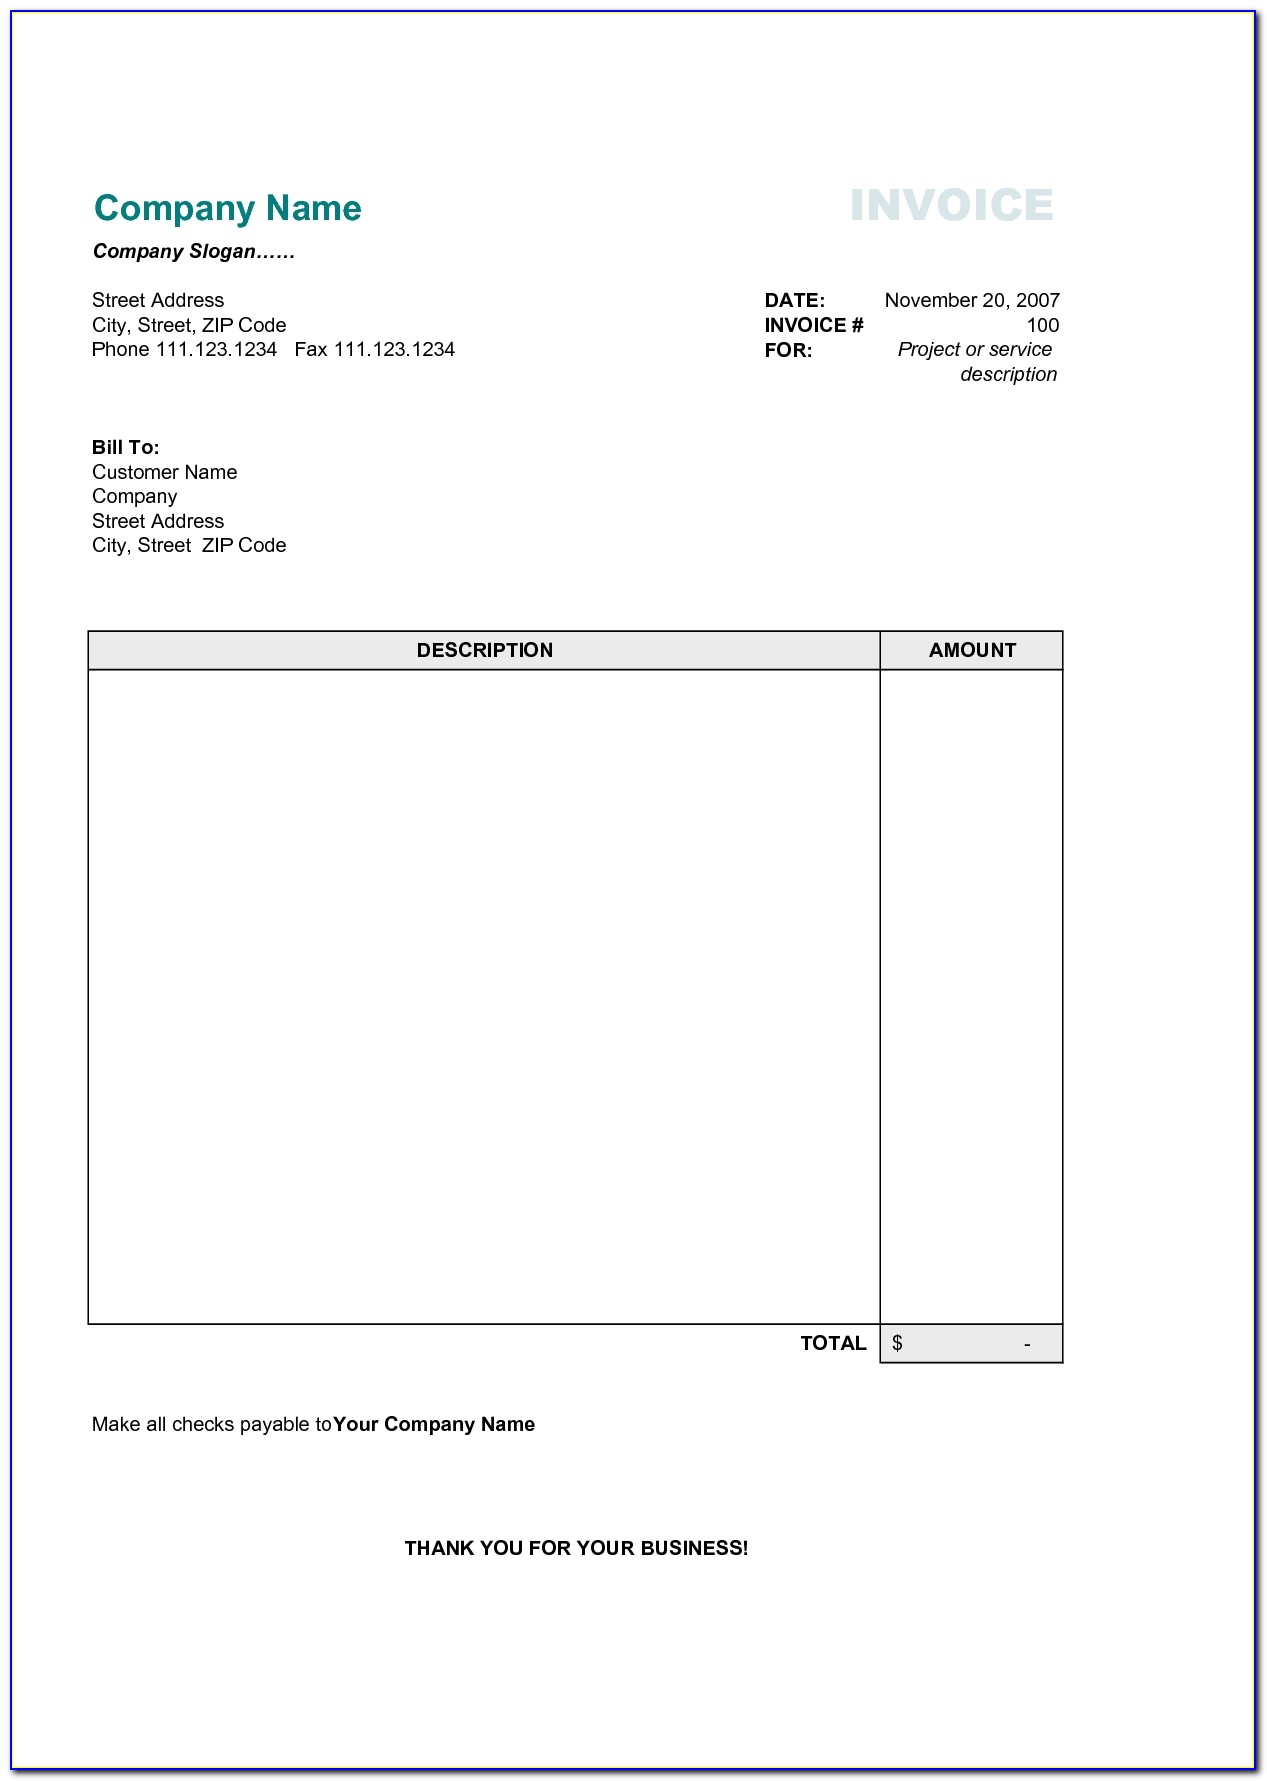 17 Best Photos Of Printable Commercial Invoice Sample Business Simple Invoice Form